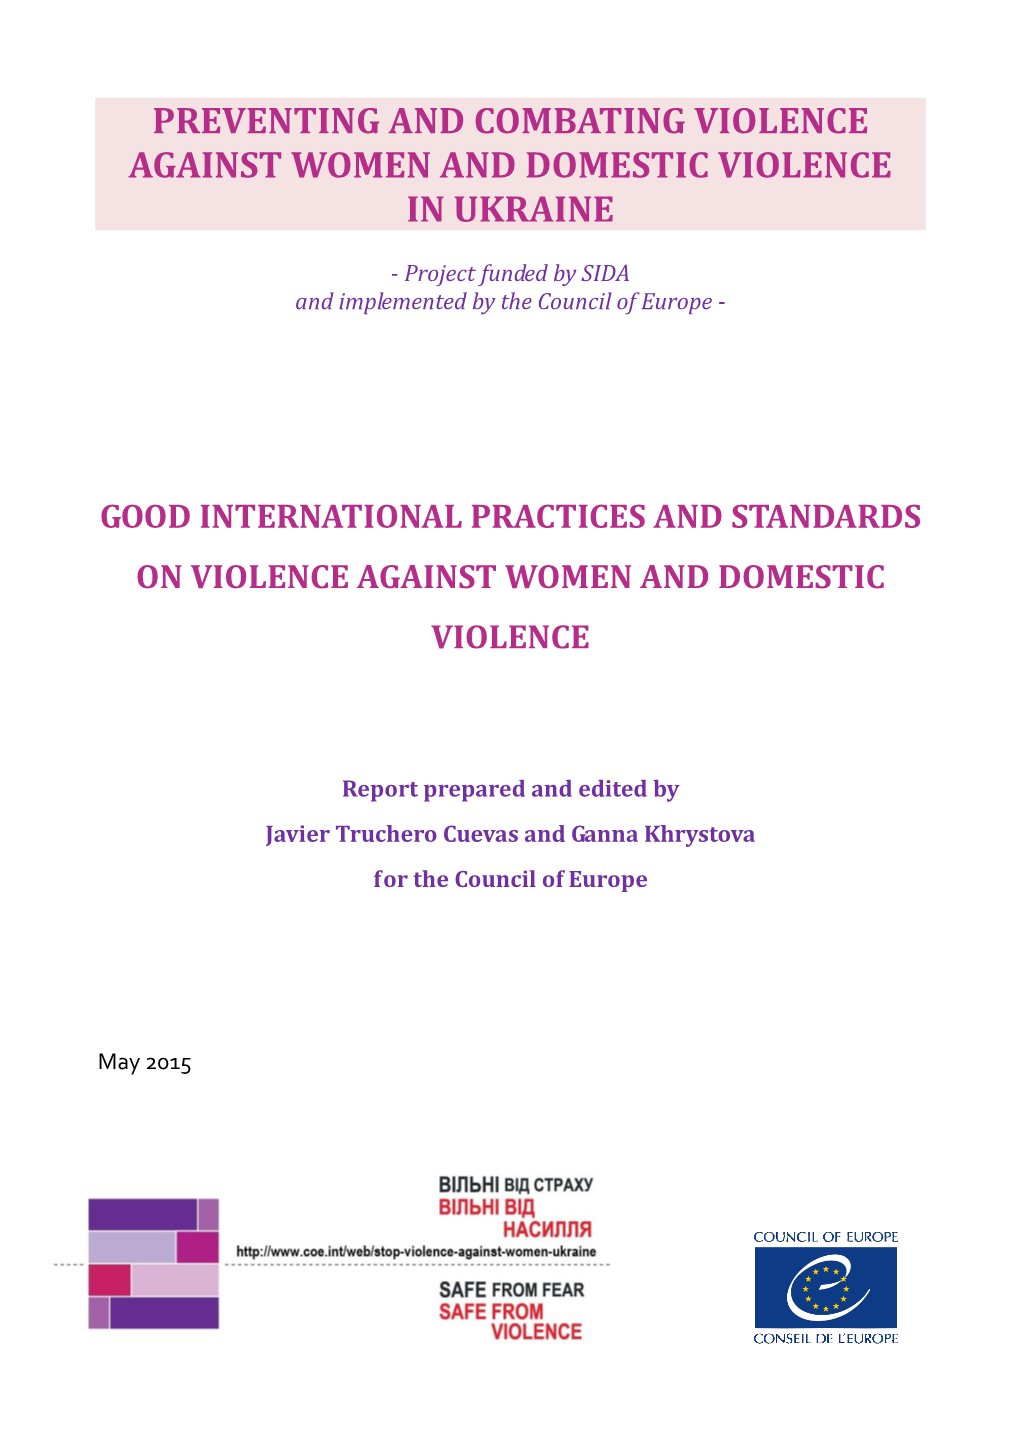 Preventing and Combating Violence Against Women and Domestic Violence in Ukraine